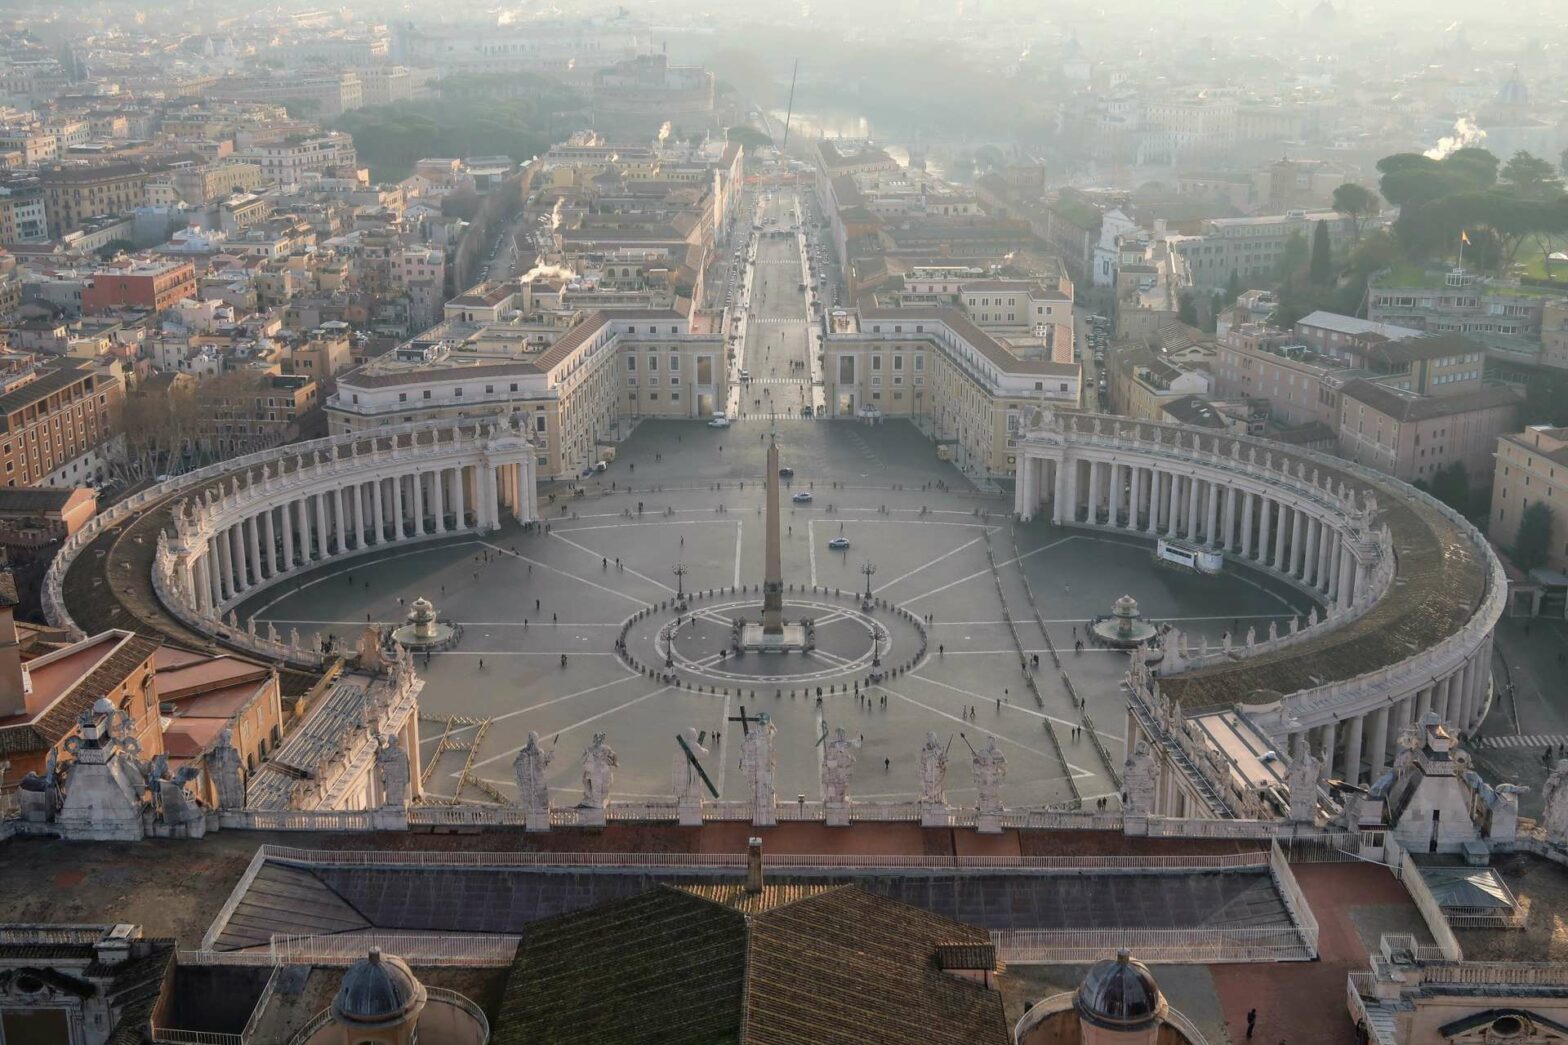 View of Vatican City from the Dome of St Peter's Basilica